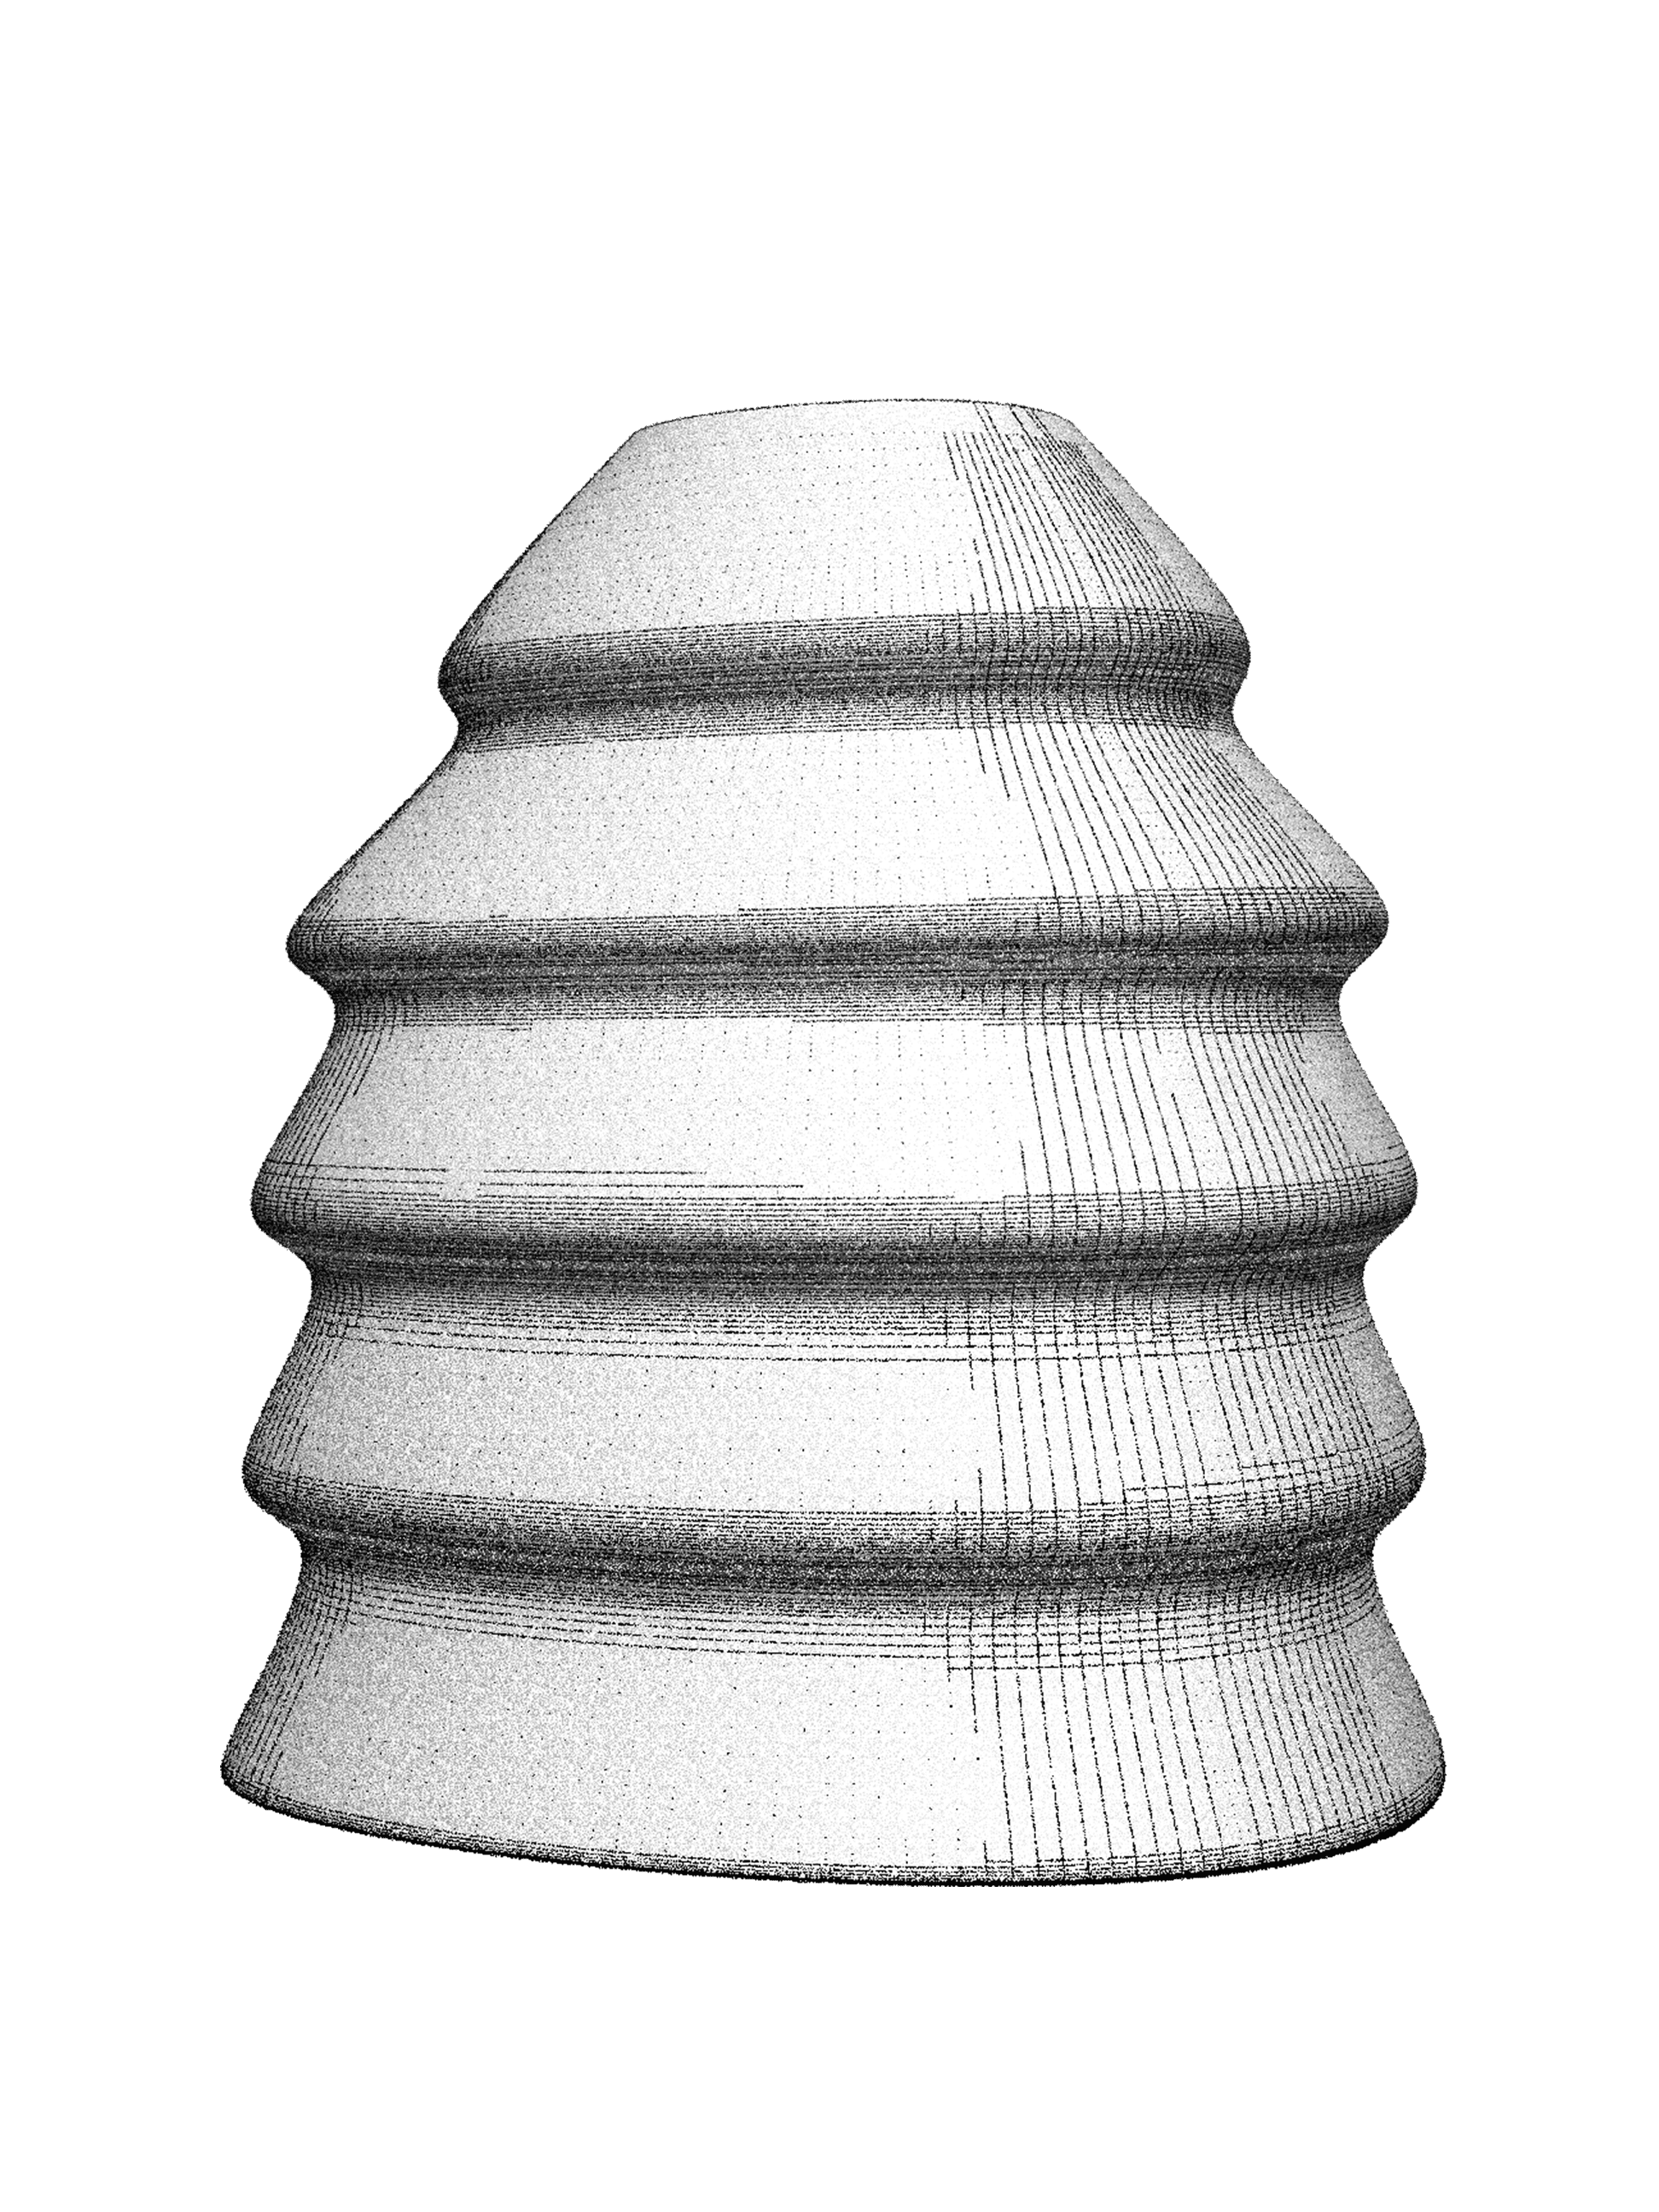 Rendered concept of lamp: five bands stacked on each other